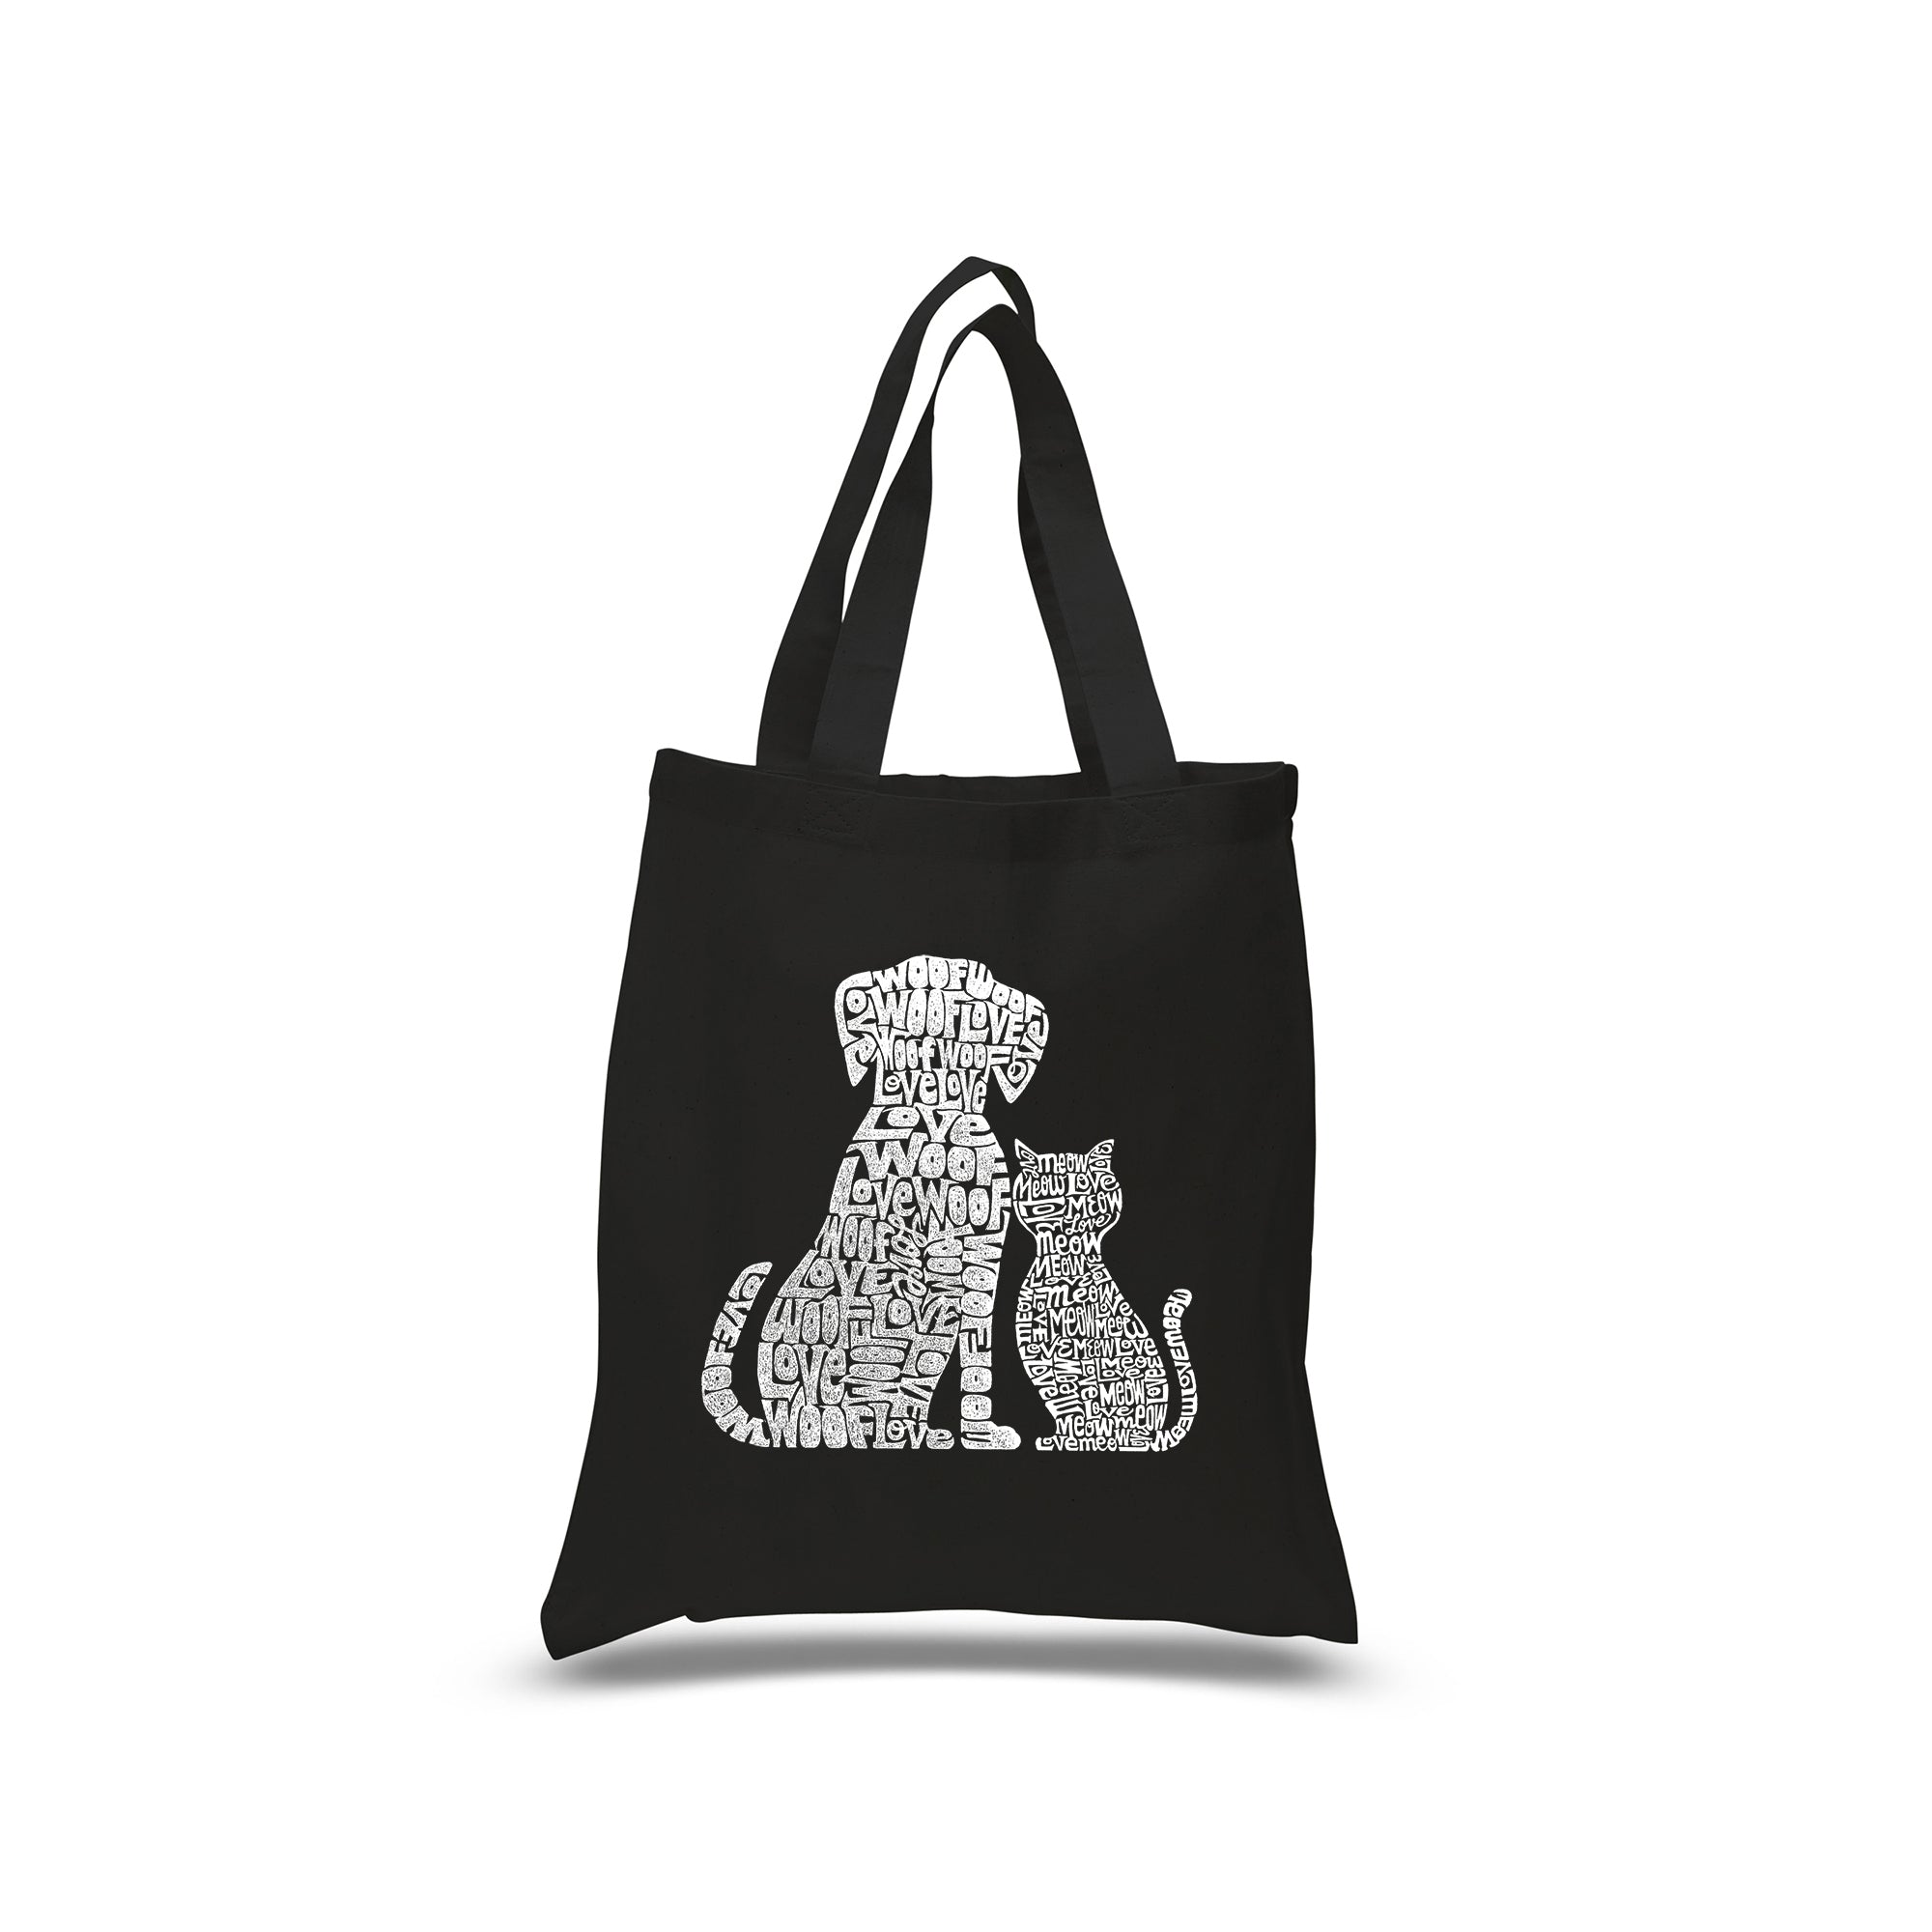 Small Word Art Tote Bag - Dogs And Cats - Red - Small